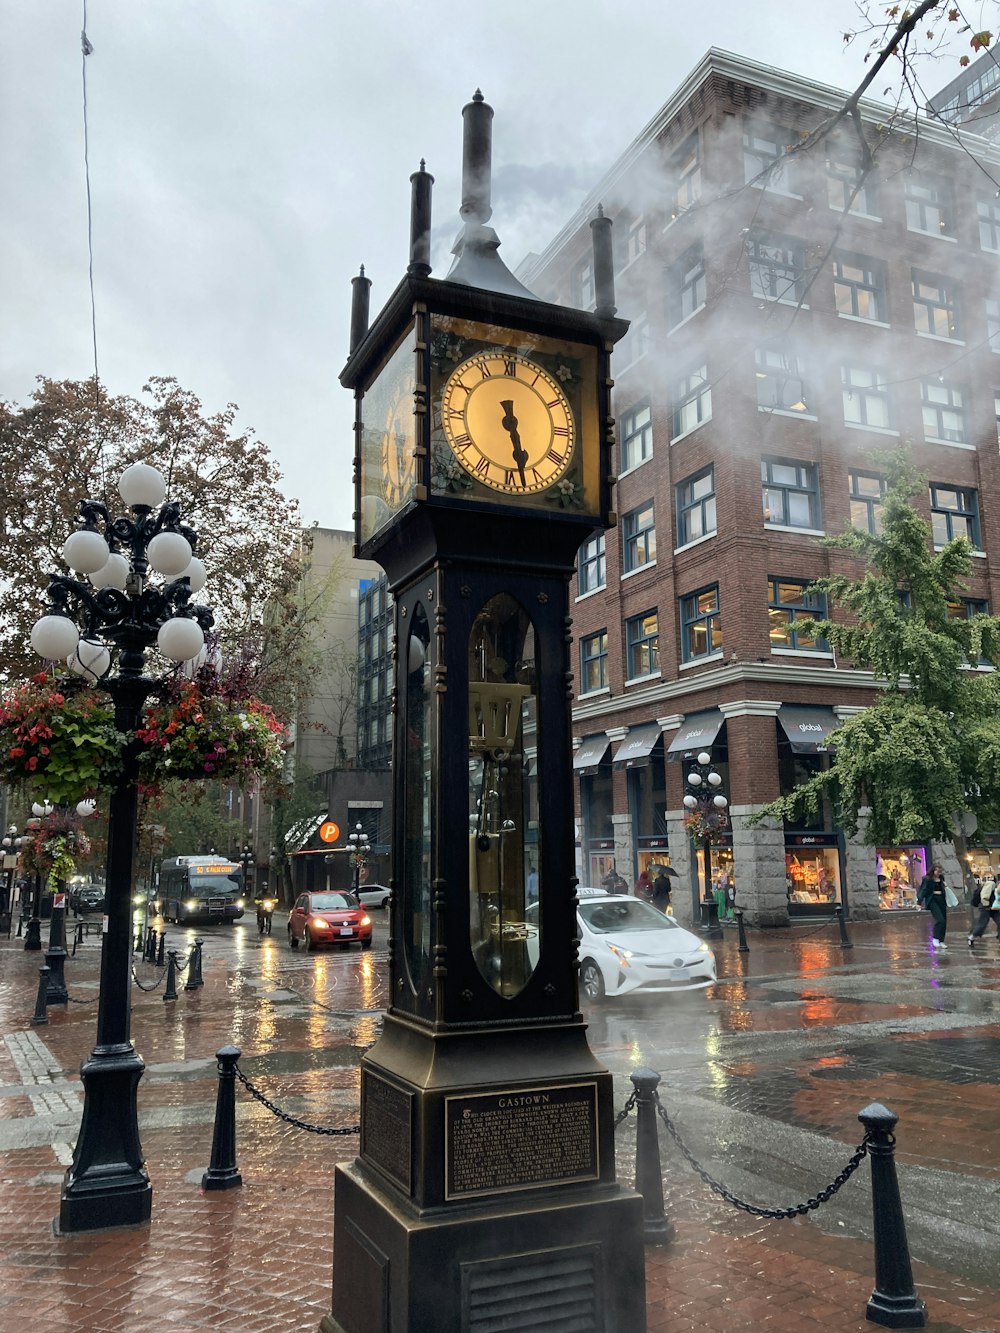 a clock tower on a city street in the rain